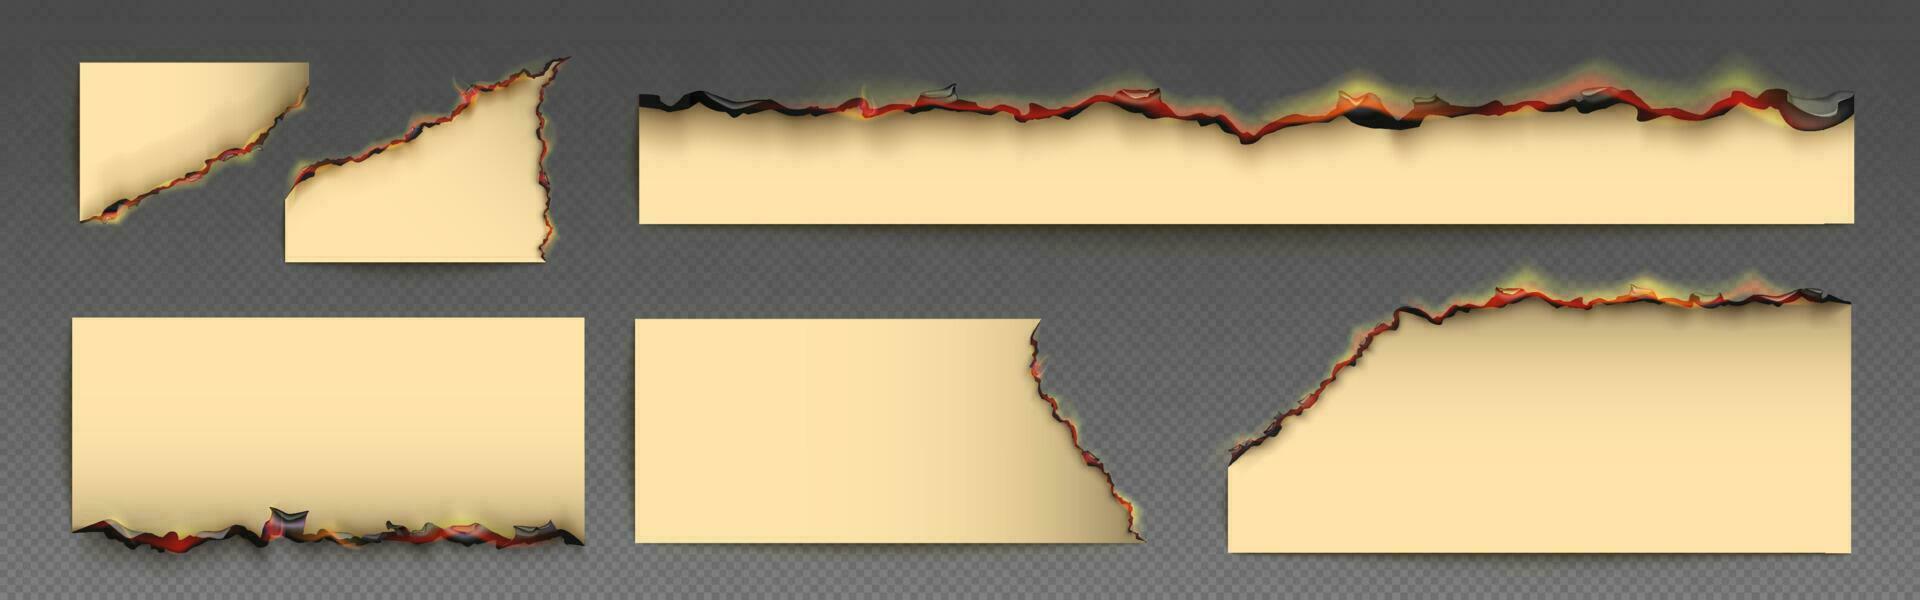 Burnt parchment paper edge effect with fire vector